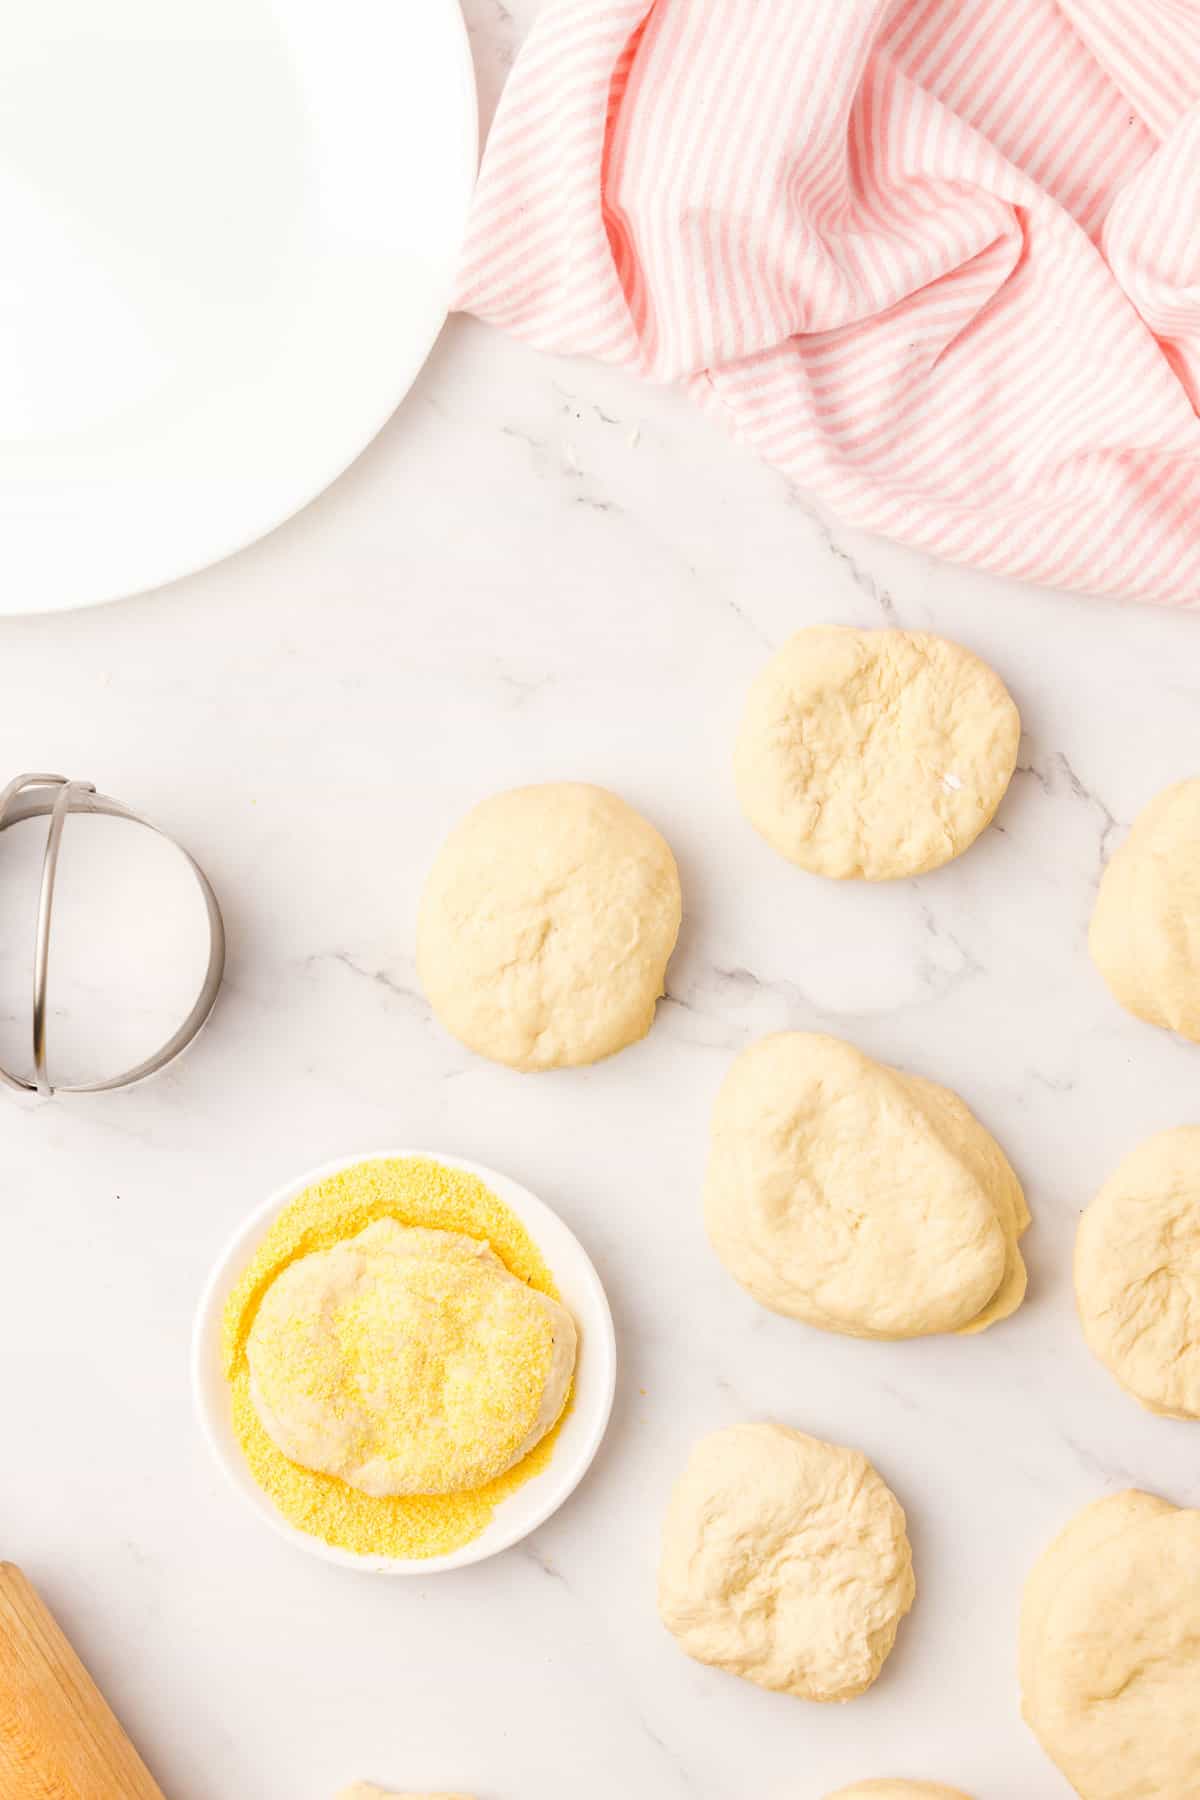 Coat Cut Dough Discs with Corn Meal for English Muffin Recipe